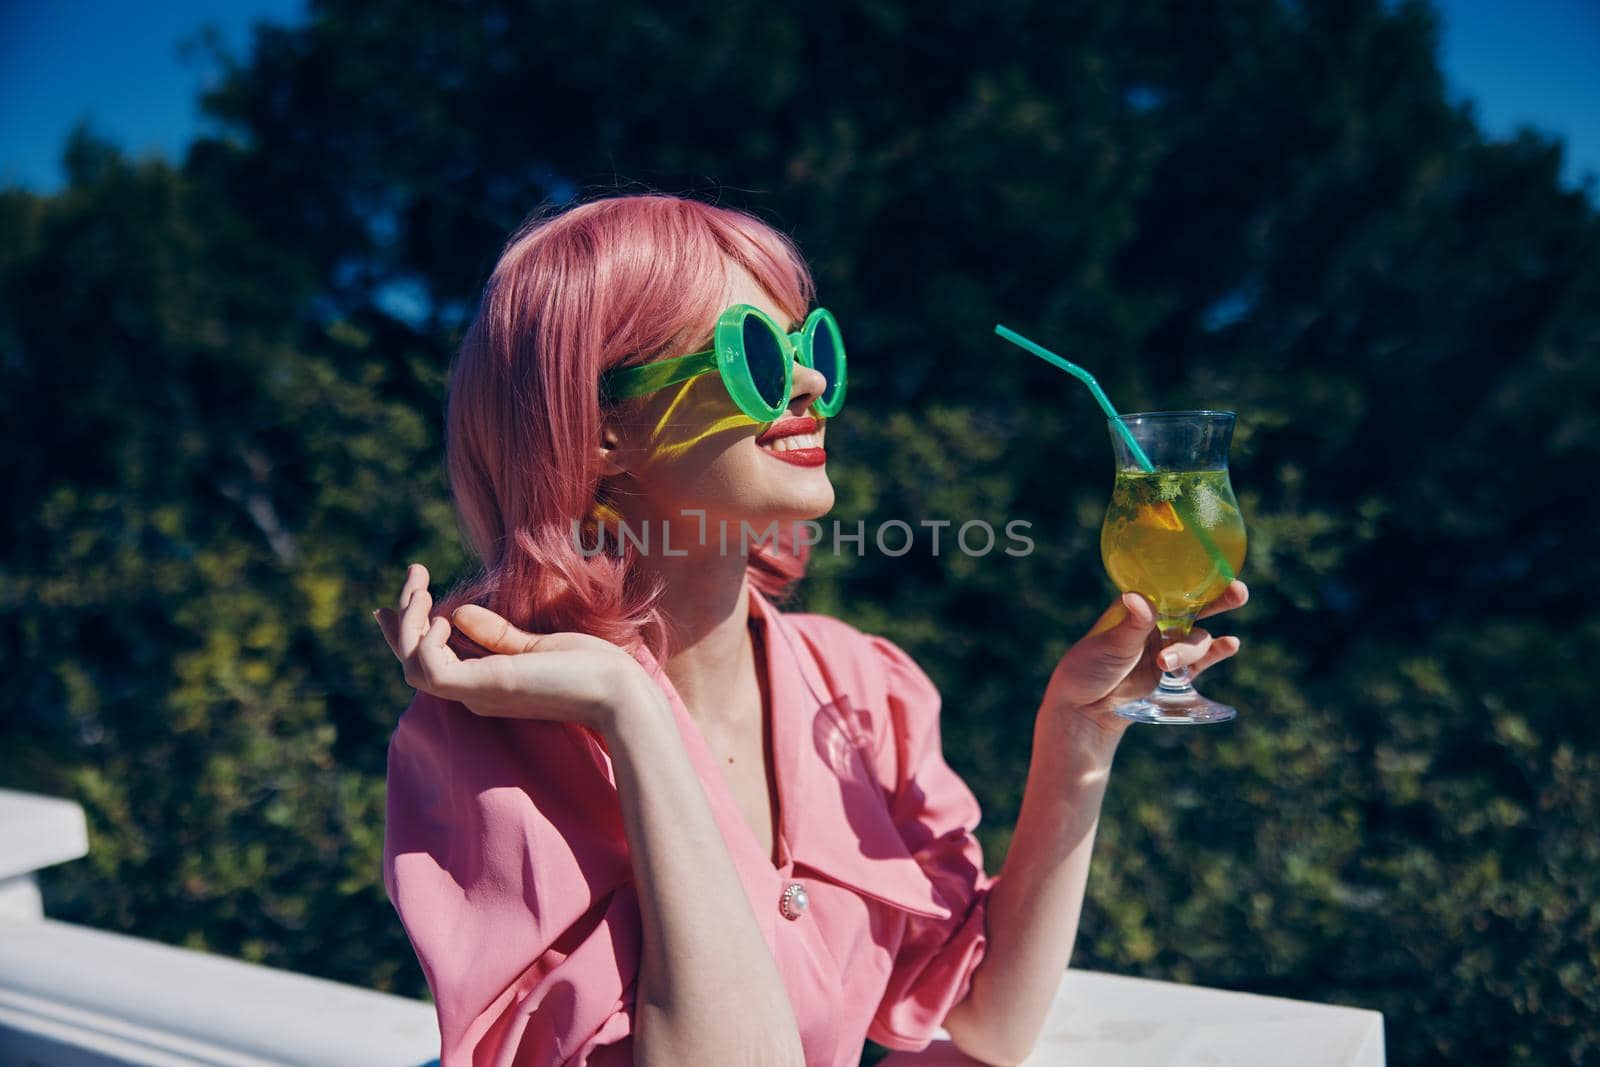 cheerful woman green glasses glamor cocktail fun Relaxation concept by SHOTPRIME